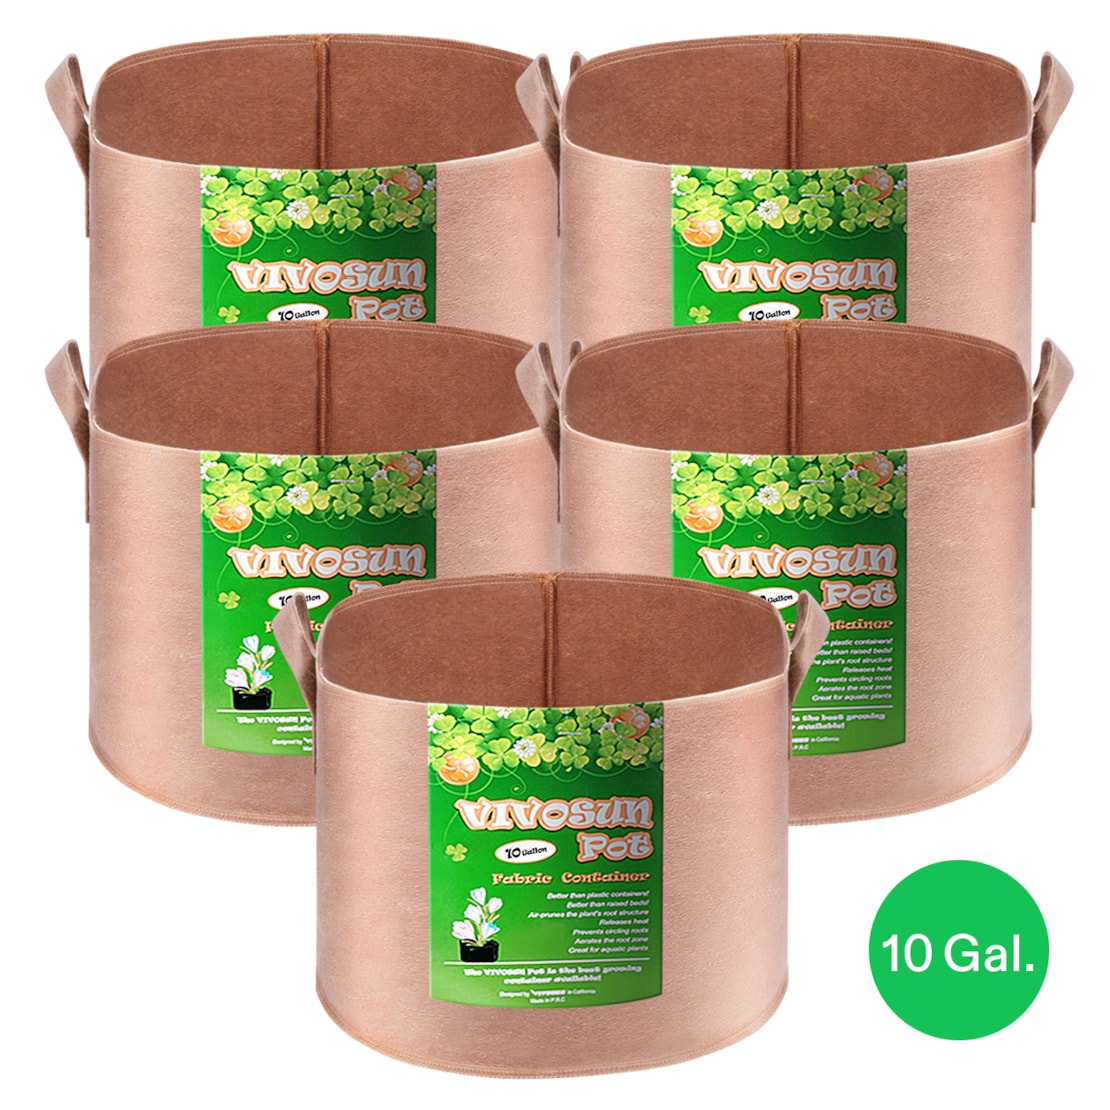 VIVOSUN 10 Gallon Grow Bags 5-Pack Brown Thickened Nonwoven Fabric Pots with Handles